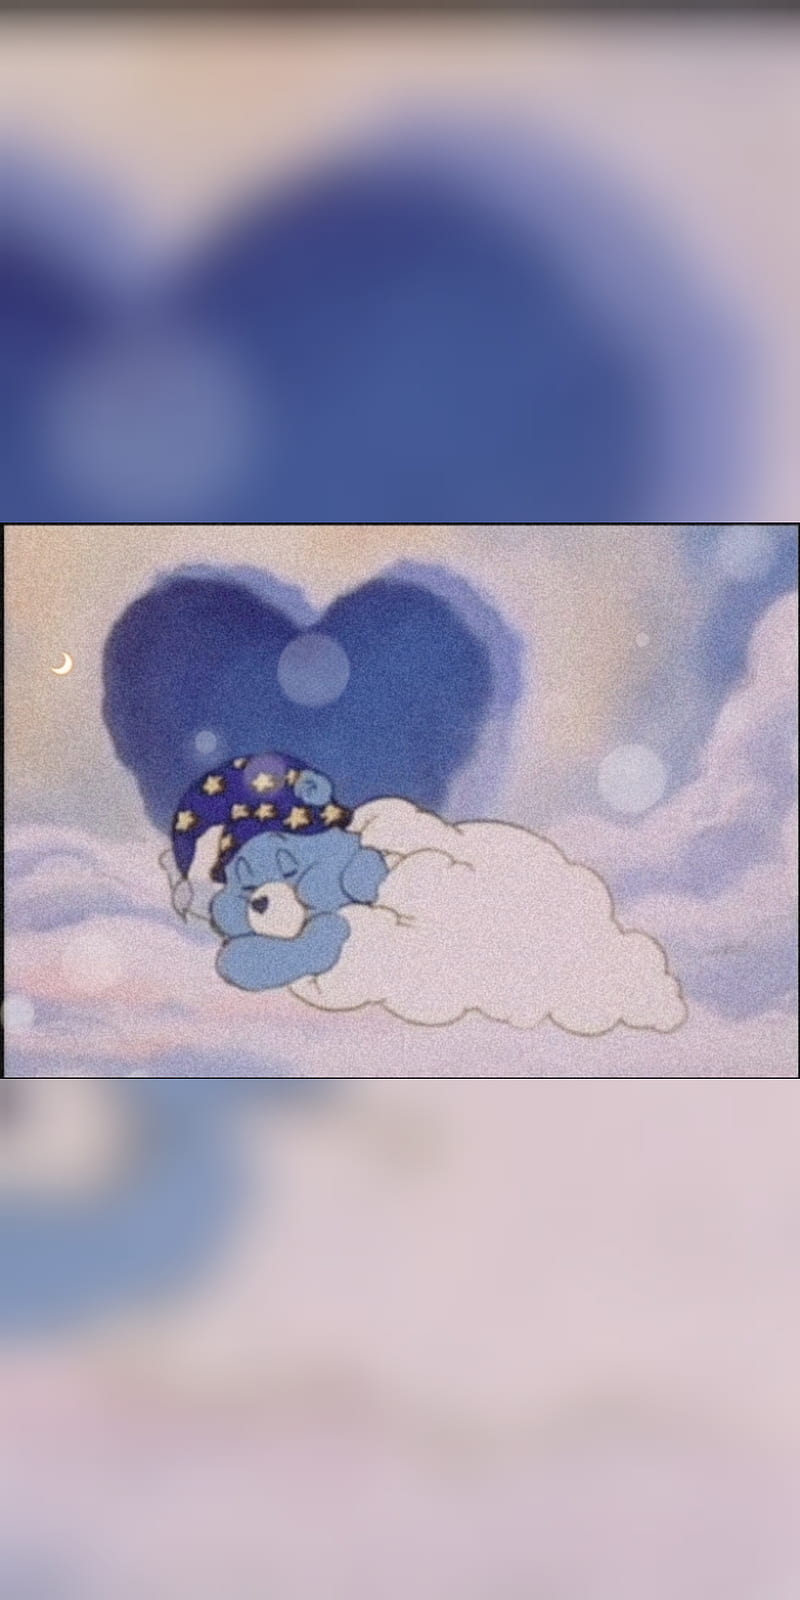 , the image features a cute blue stuffed giraffe sleeping in the clouds. The giraffe is positioned somewhat towards the bottom of the image, with its head slightly closer to the left side of the frame. There are several other smaller objects scattered around the giraffe, such as small blue objects and  - Care Bears